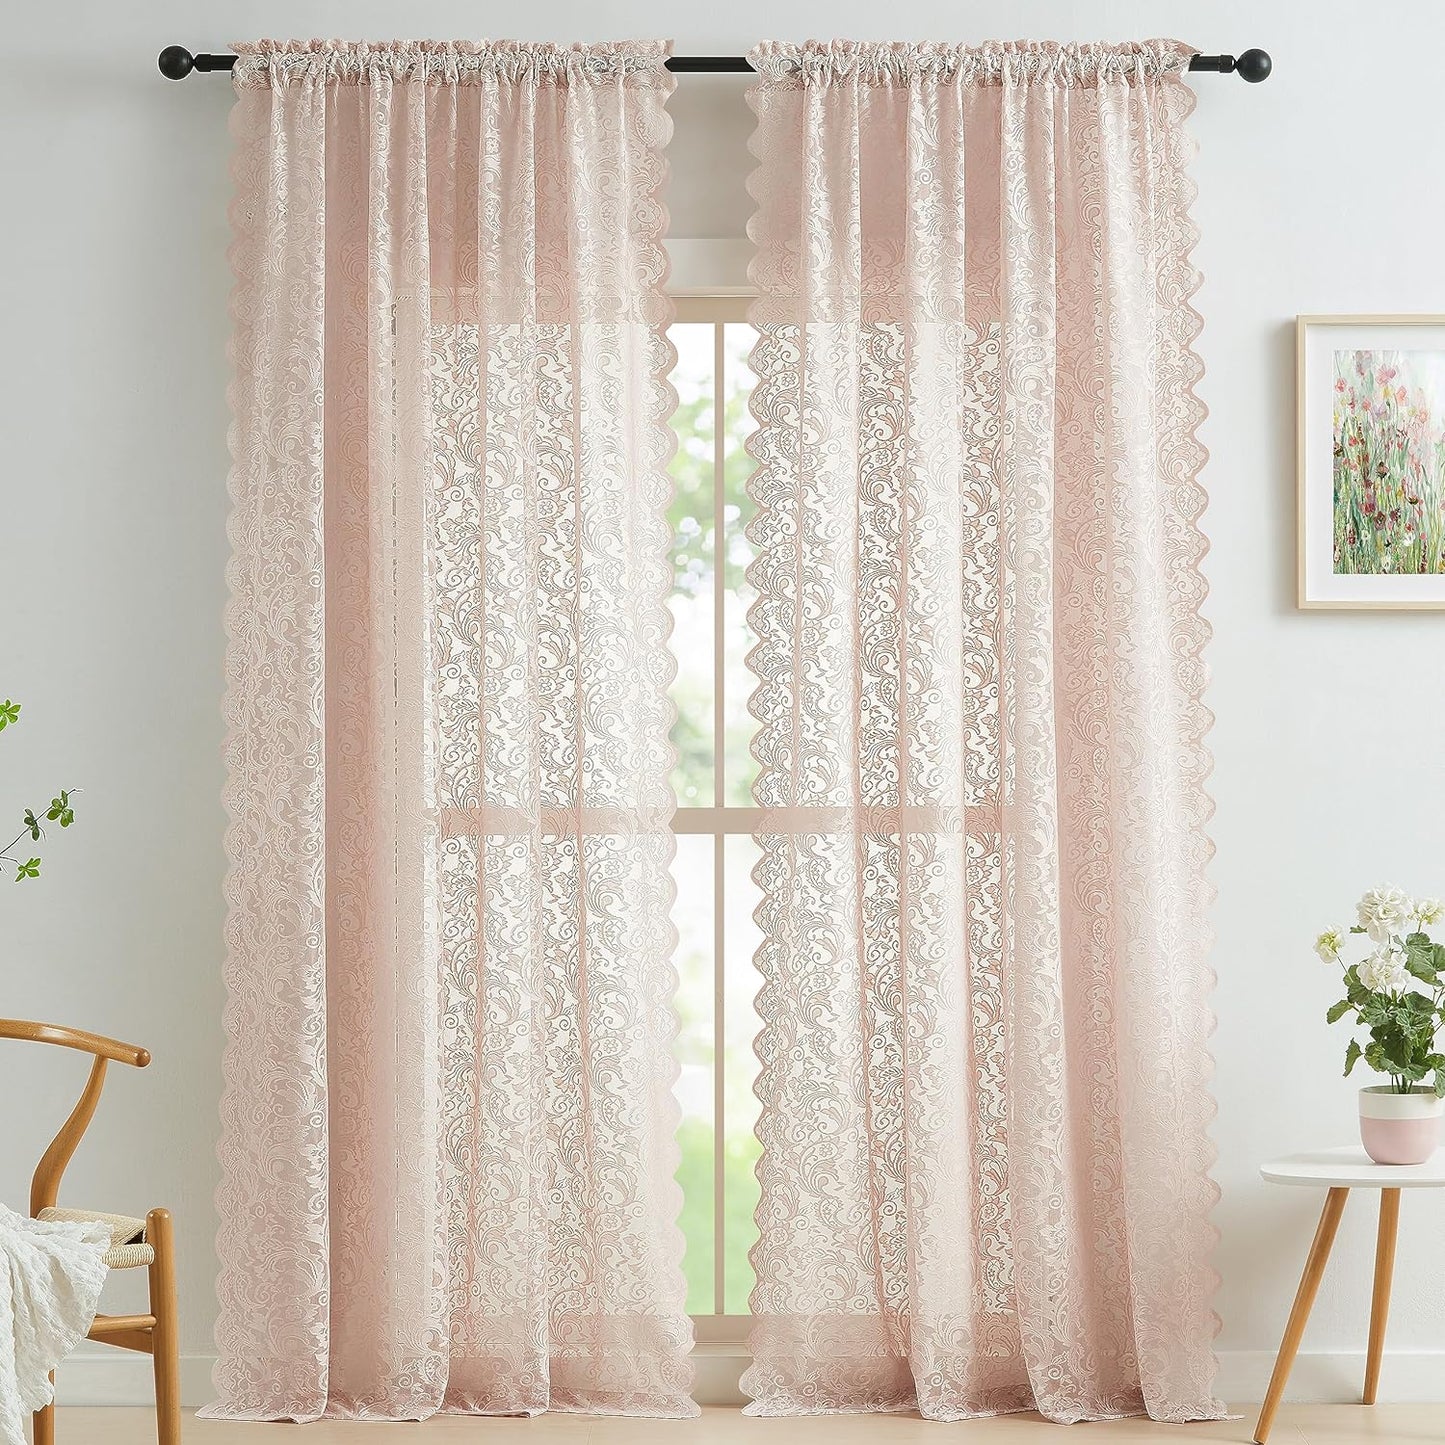 Black Sheer Lace Curtains 84 Inch Vintage Floral Sheer Gothic Curtain Panels for Living Room Bedroom Luxury Light Filtering Drapes Black Window Treatment Sets Rod Pocket 2 Panels 54" Wx84 L  Bujasso Rod Pocket Pink 54"X108"X2 